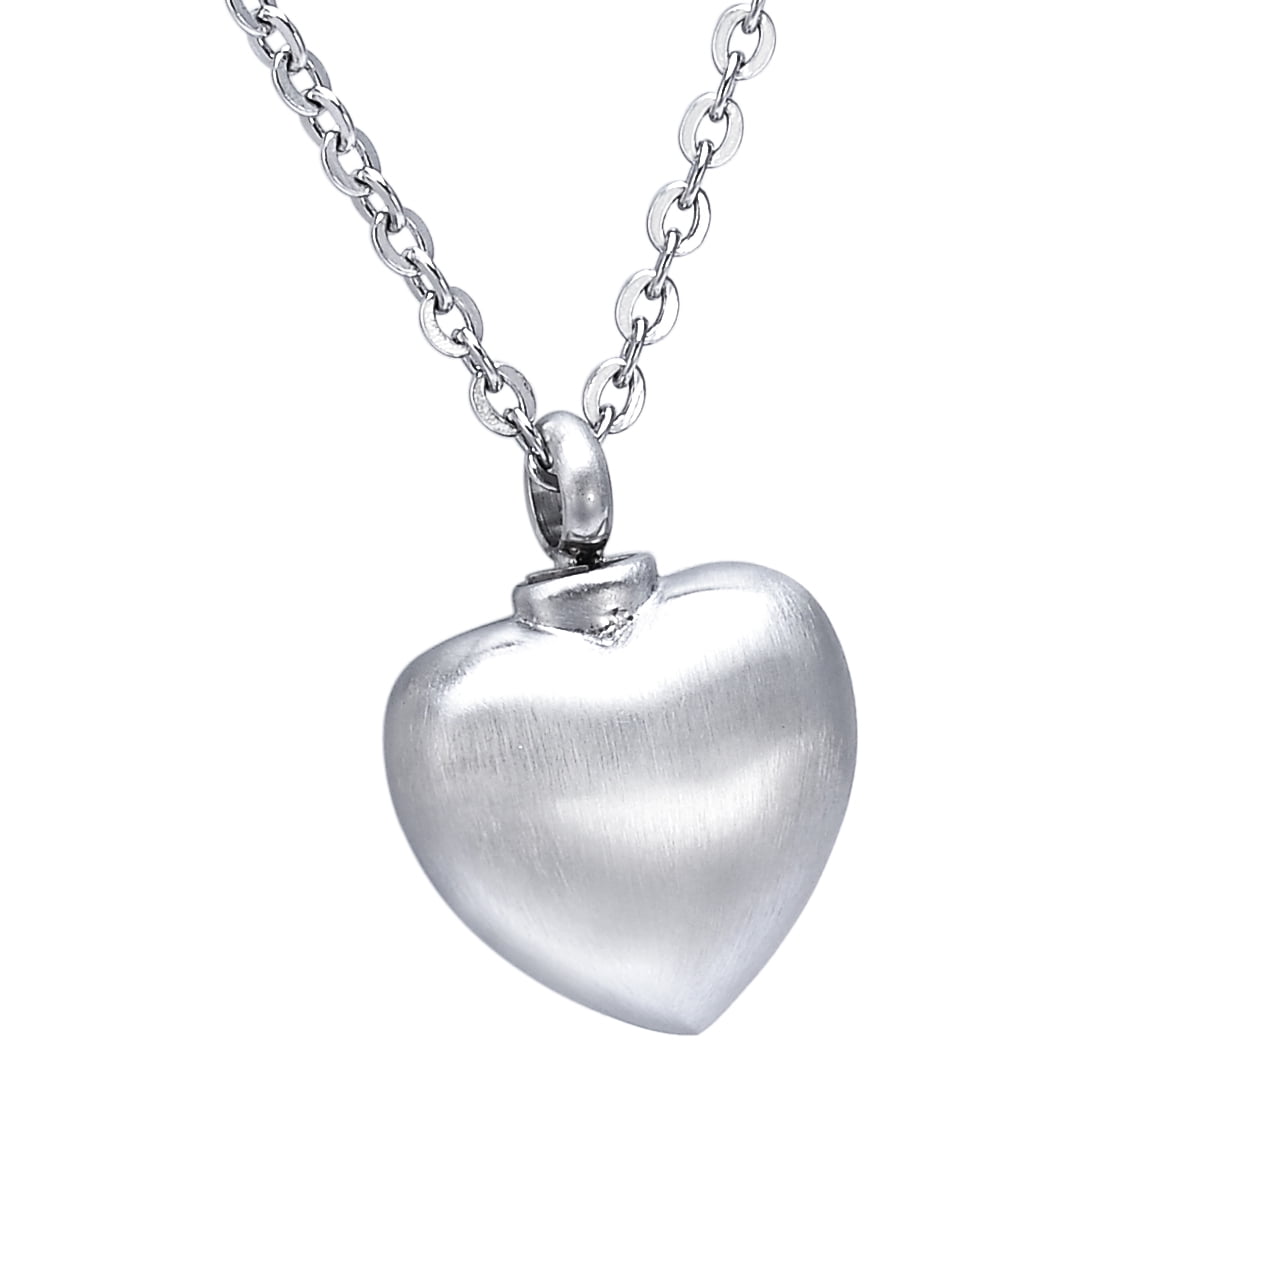 Aromita Jewelry - Silver Stainless Steel Heart Cremation Jewelry Stainless Steel Cremation Jewelry For Ashes